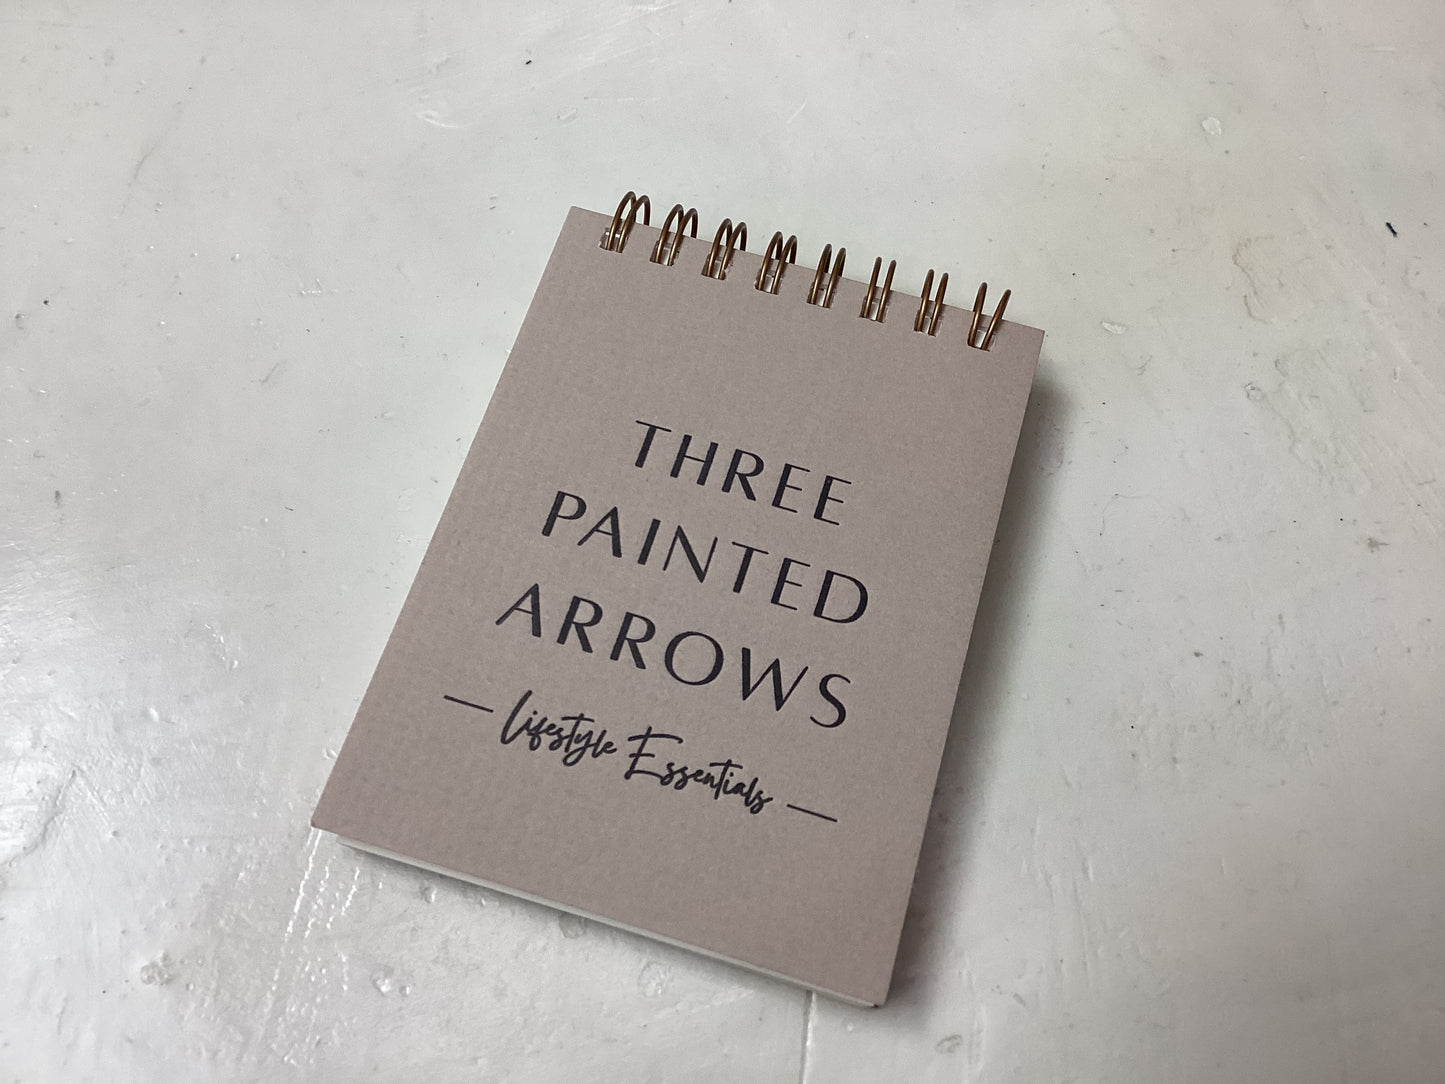 Three Painted Arrows Jotter